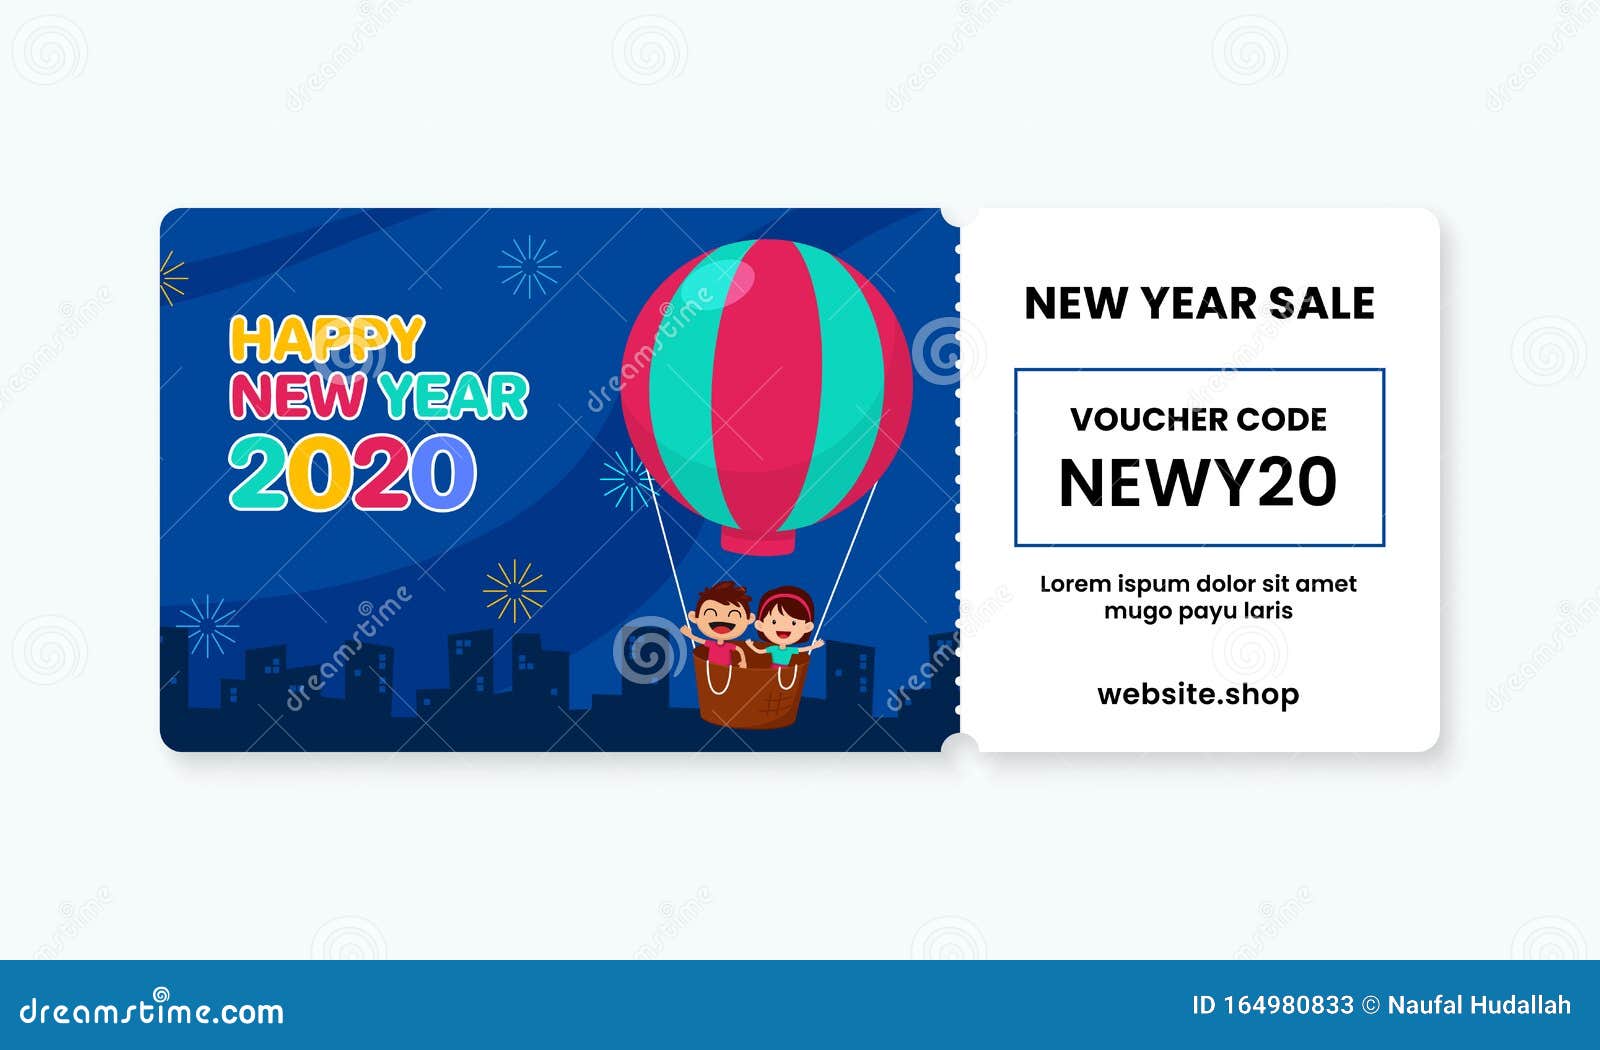 Happy New Year 2020 For Kids Voucher Gift Template Vector